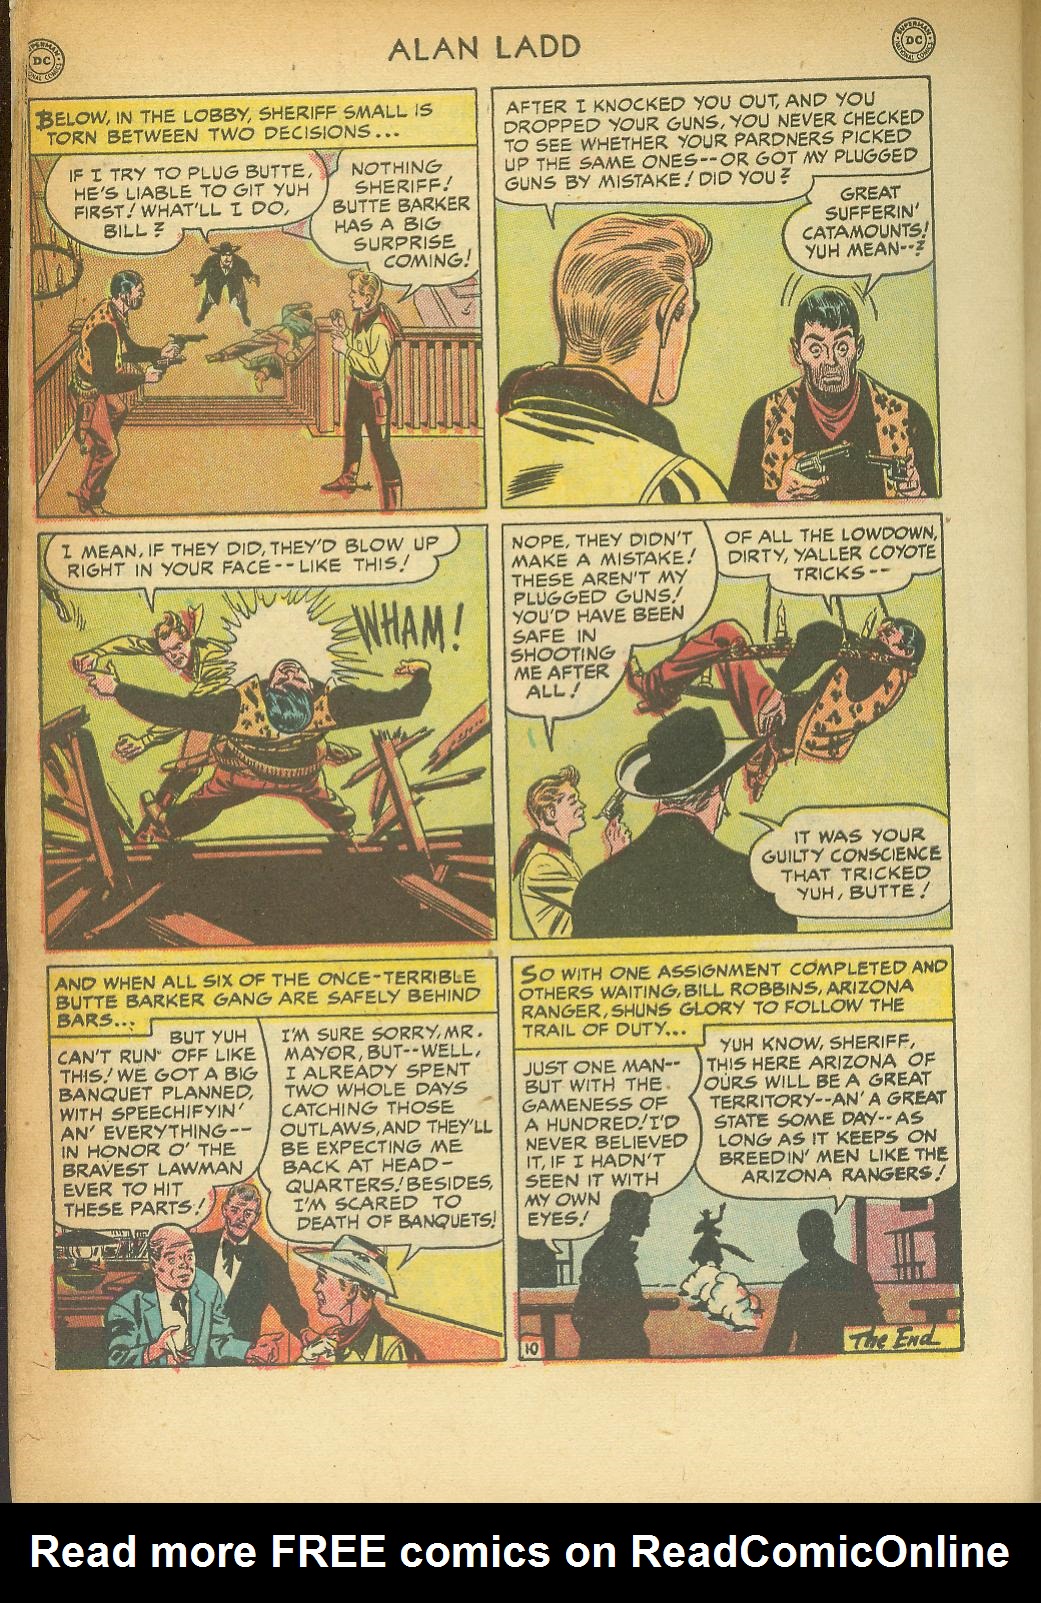 Read online Adventures of Alan Ladd comic -  Issue #8 - 48